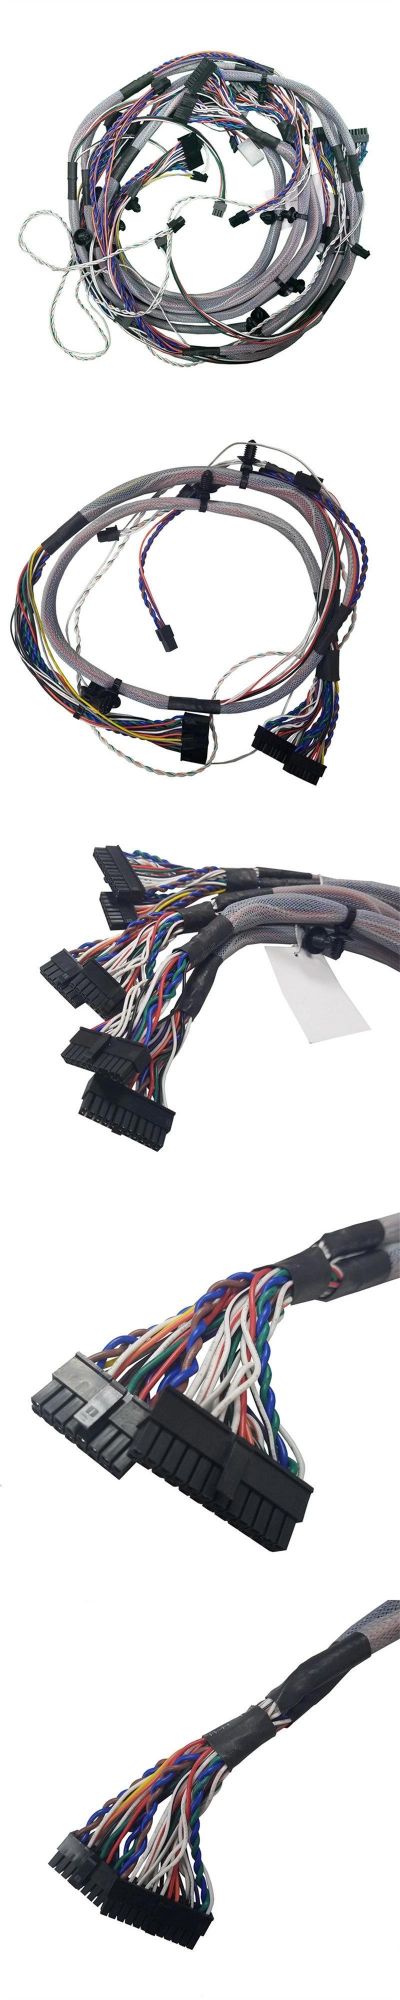 OEM / Customized Computer Wiring Harness